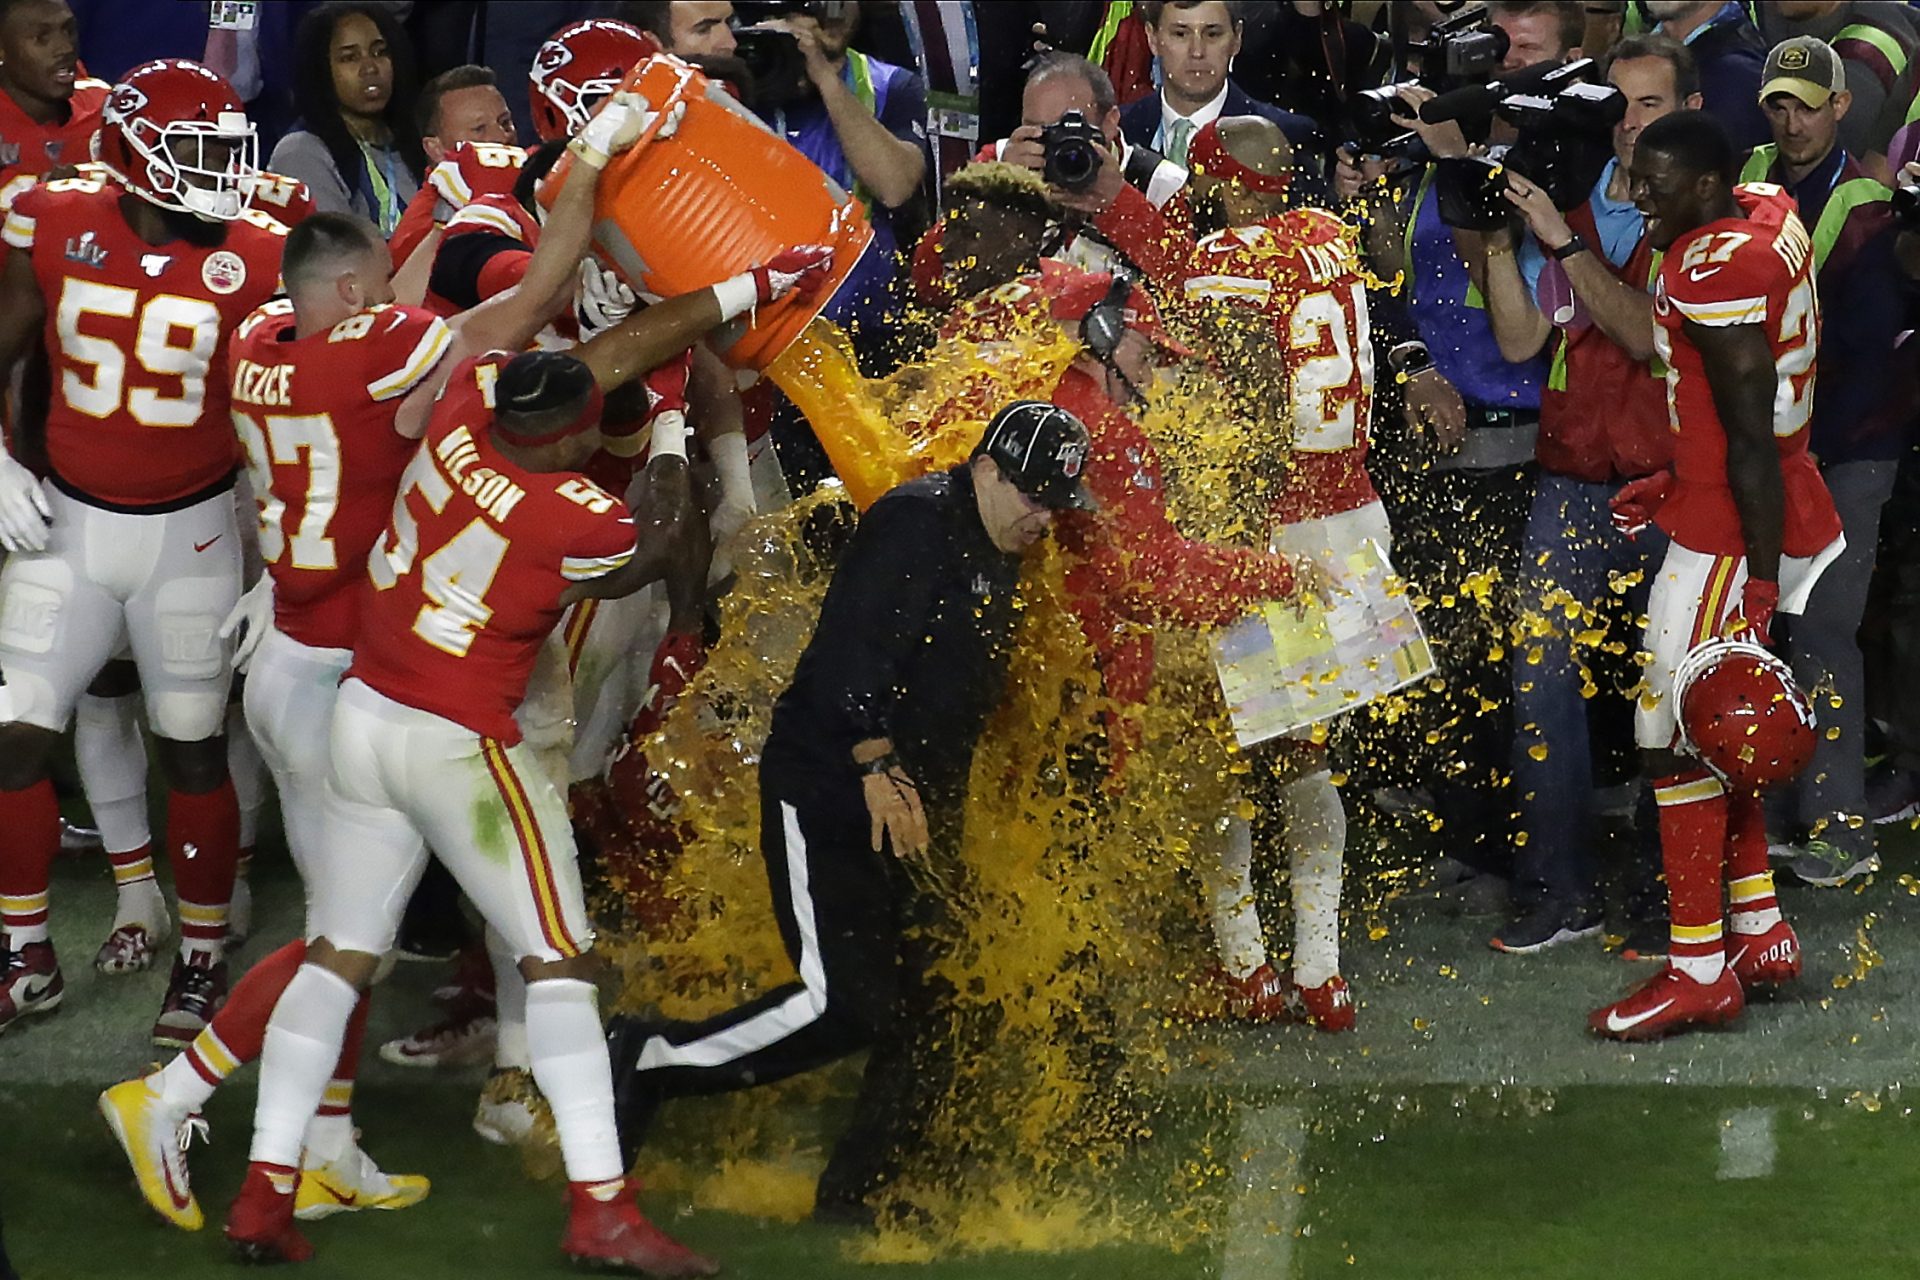 Kansan City Chiefs' players pour a cooler of Gatorade on head coach Andy Reid and members of the coaching staff, after winning the NFL Super Bowl 54 football game Sunday, Feb. 2, 2020, in Miami Gardens, Fla. The Chiefs' defeated the San Francisco 49ers 31-20.